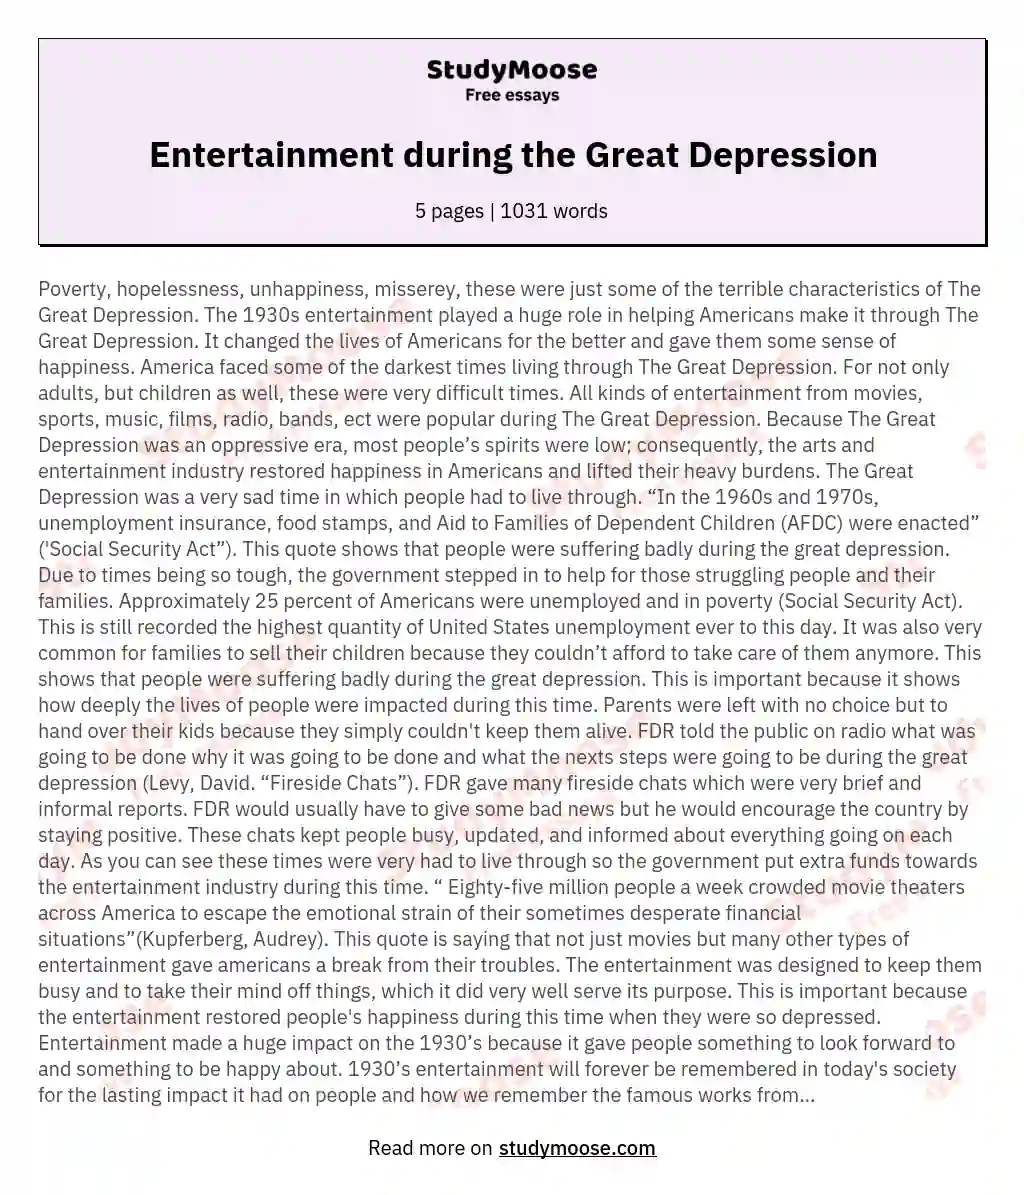 Entertainment during the Great Depression essay